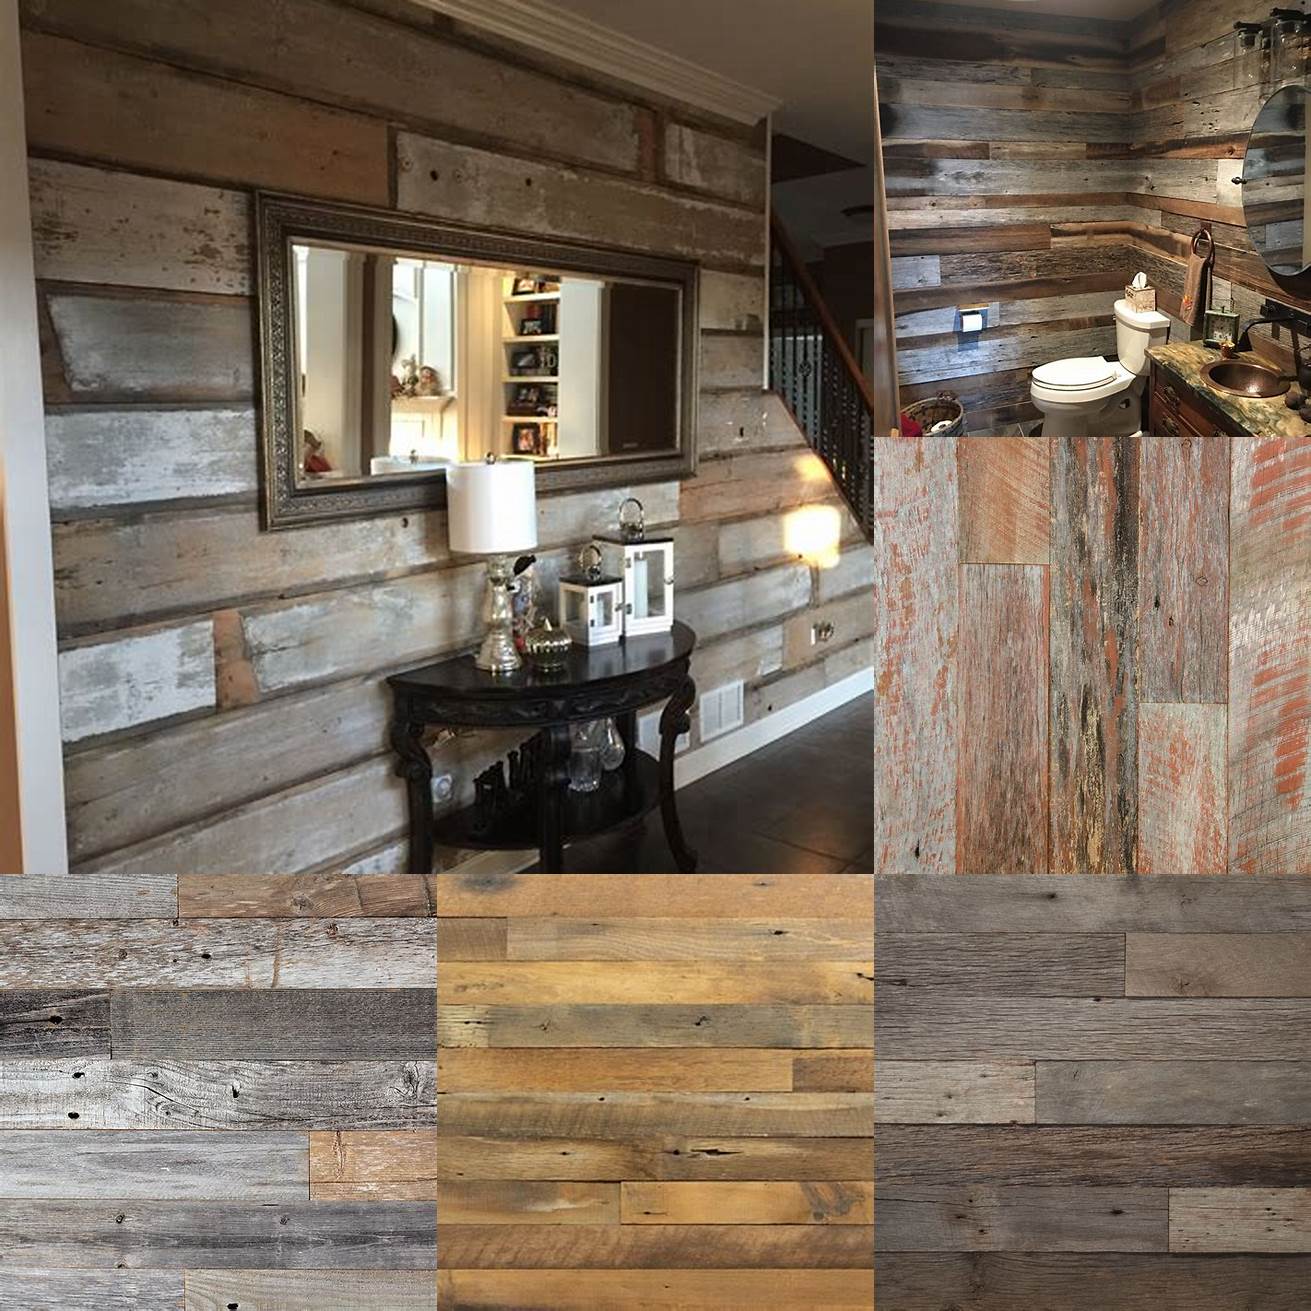 Barnwood This is wood that has been weathered by exposure to the elements Barnwood has a rustic aged look that can add a lot of charm to a bathroom